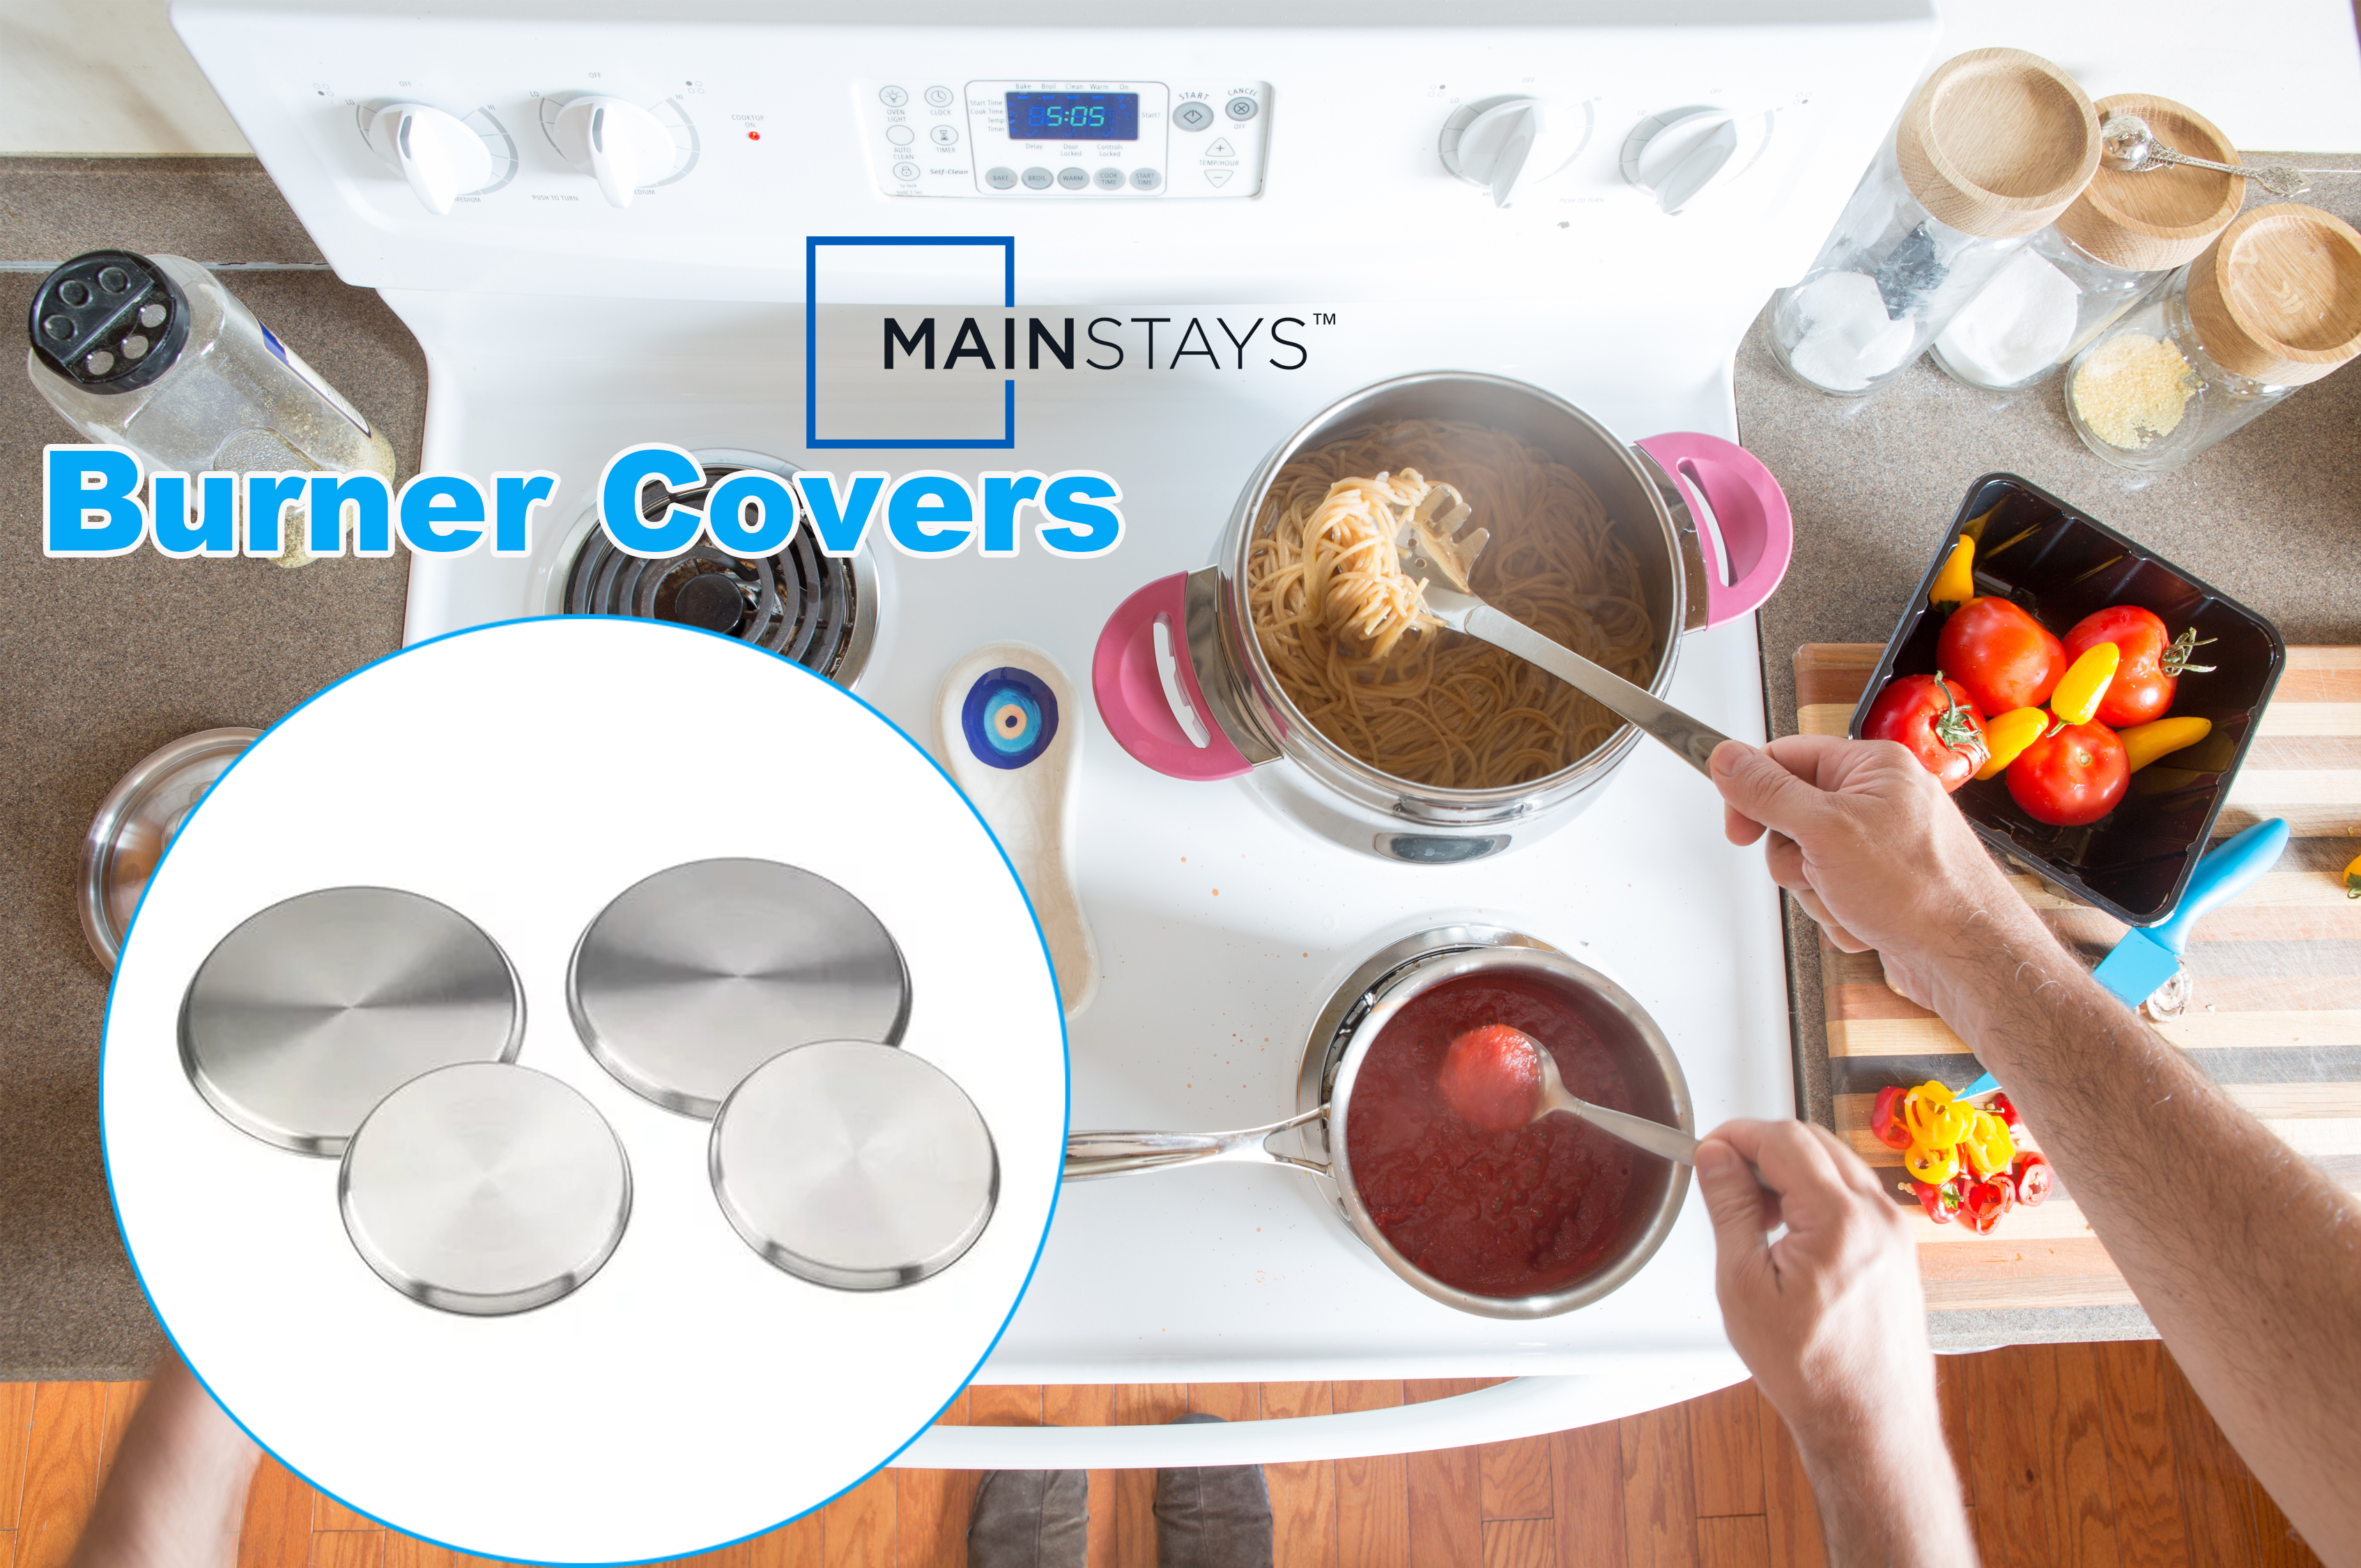 Mainstays Stove Burner Covers, 4 Piece Set, Stainless Steel, Silver - image 5 of 13